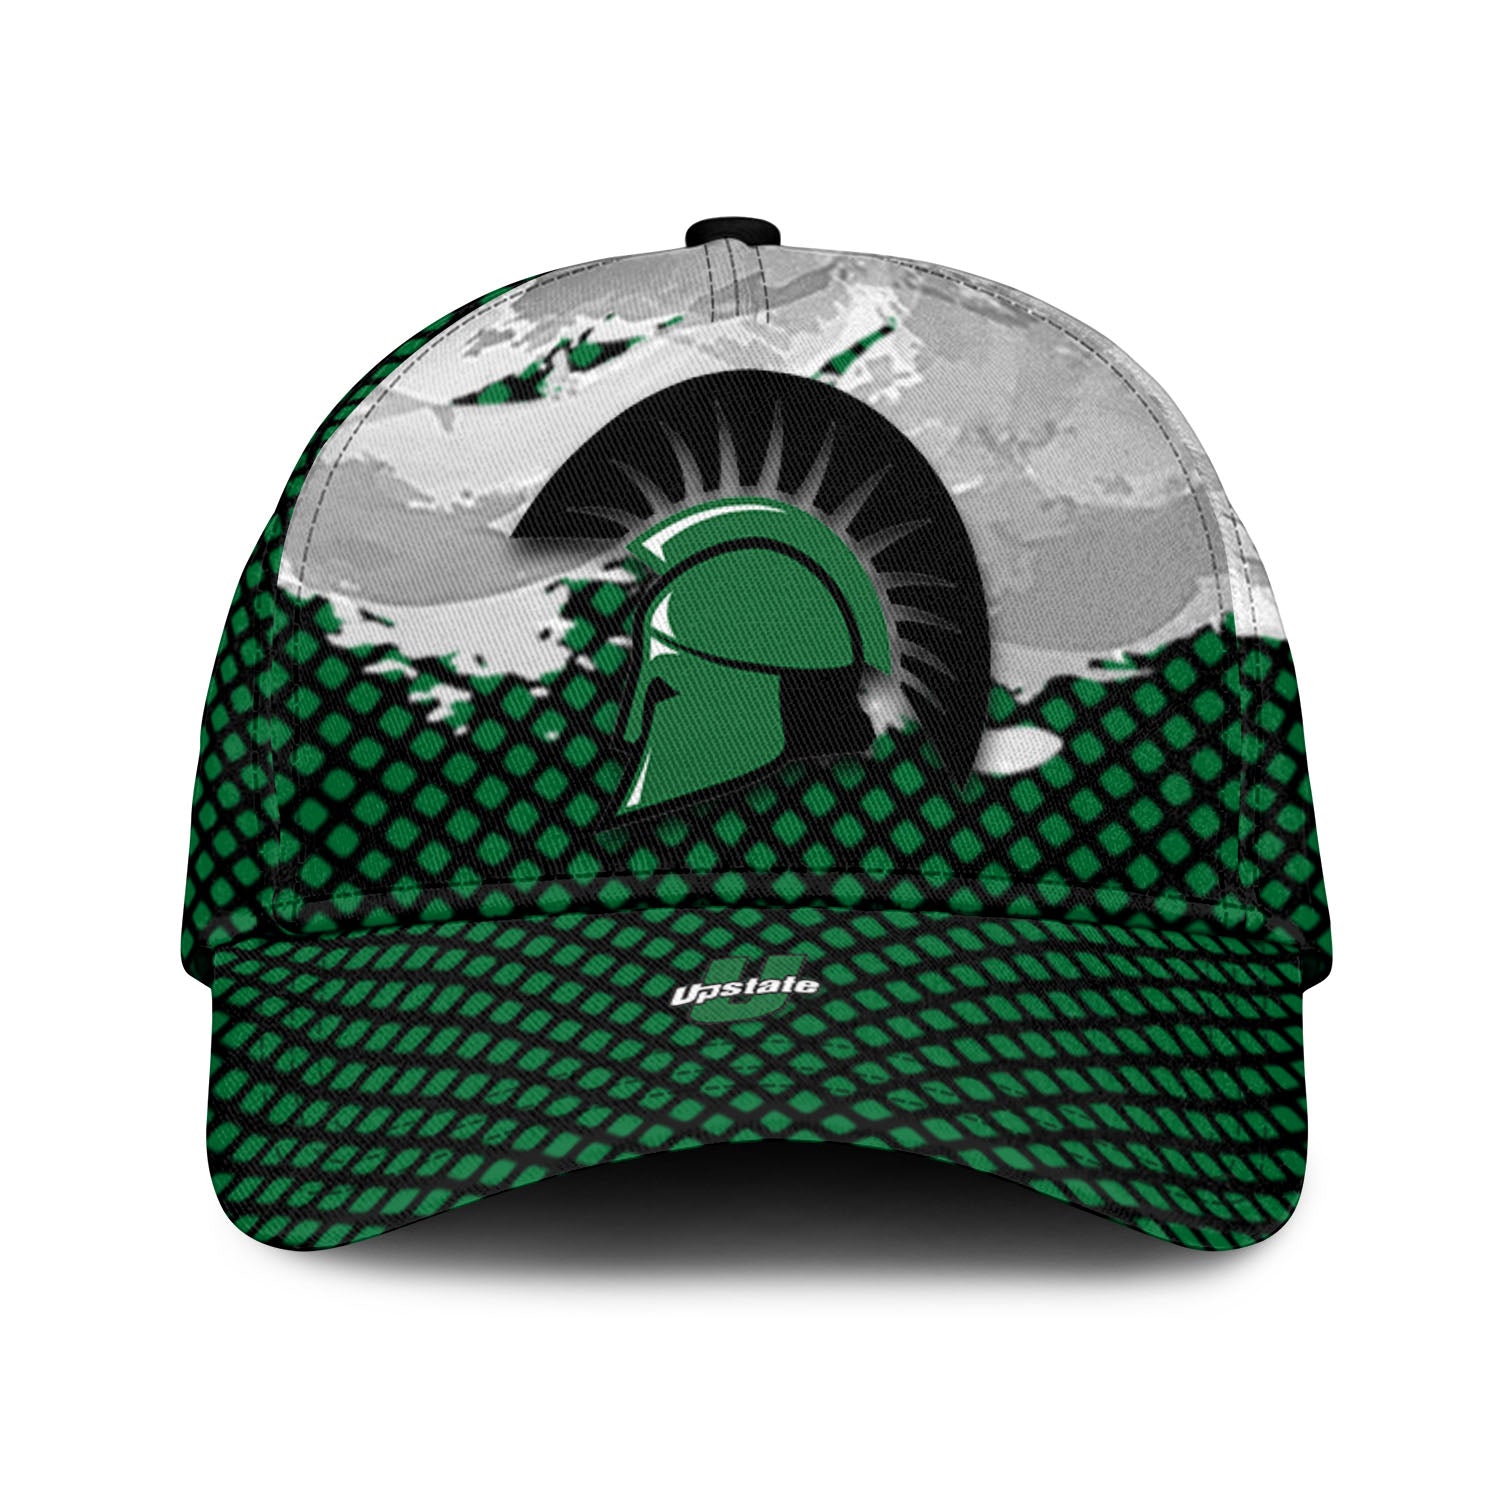 USC Upstate Spartans NCAA Classic Cap Net Pattern Grunge Style – Hothot